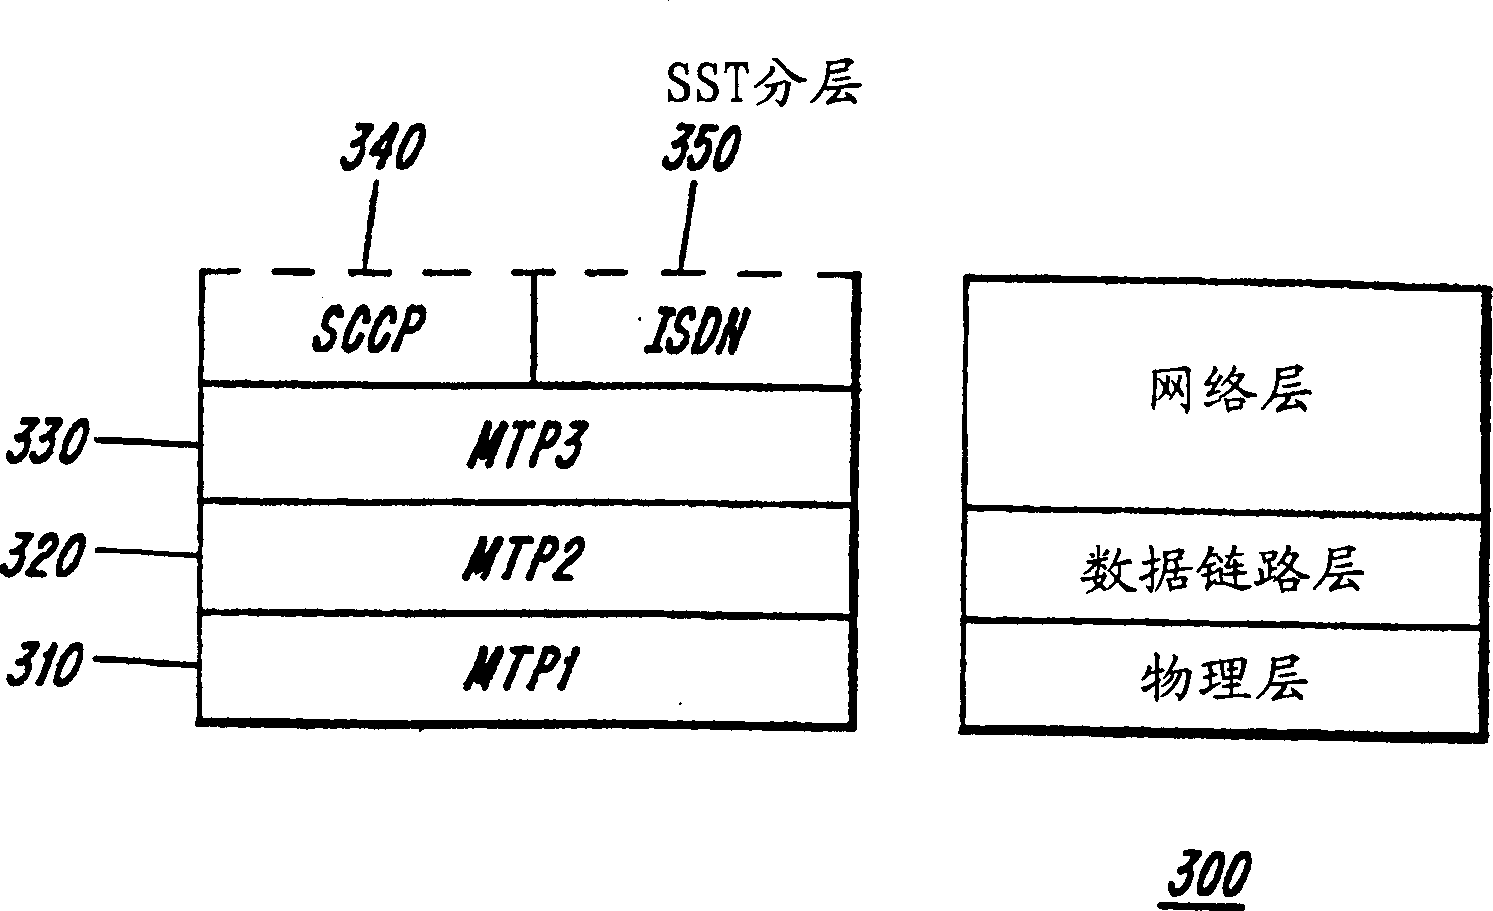 Integrating signaling system number 7 (SS7) networks with networks using multi-protocol label switching (MPLS)